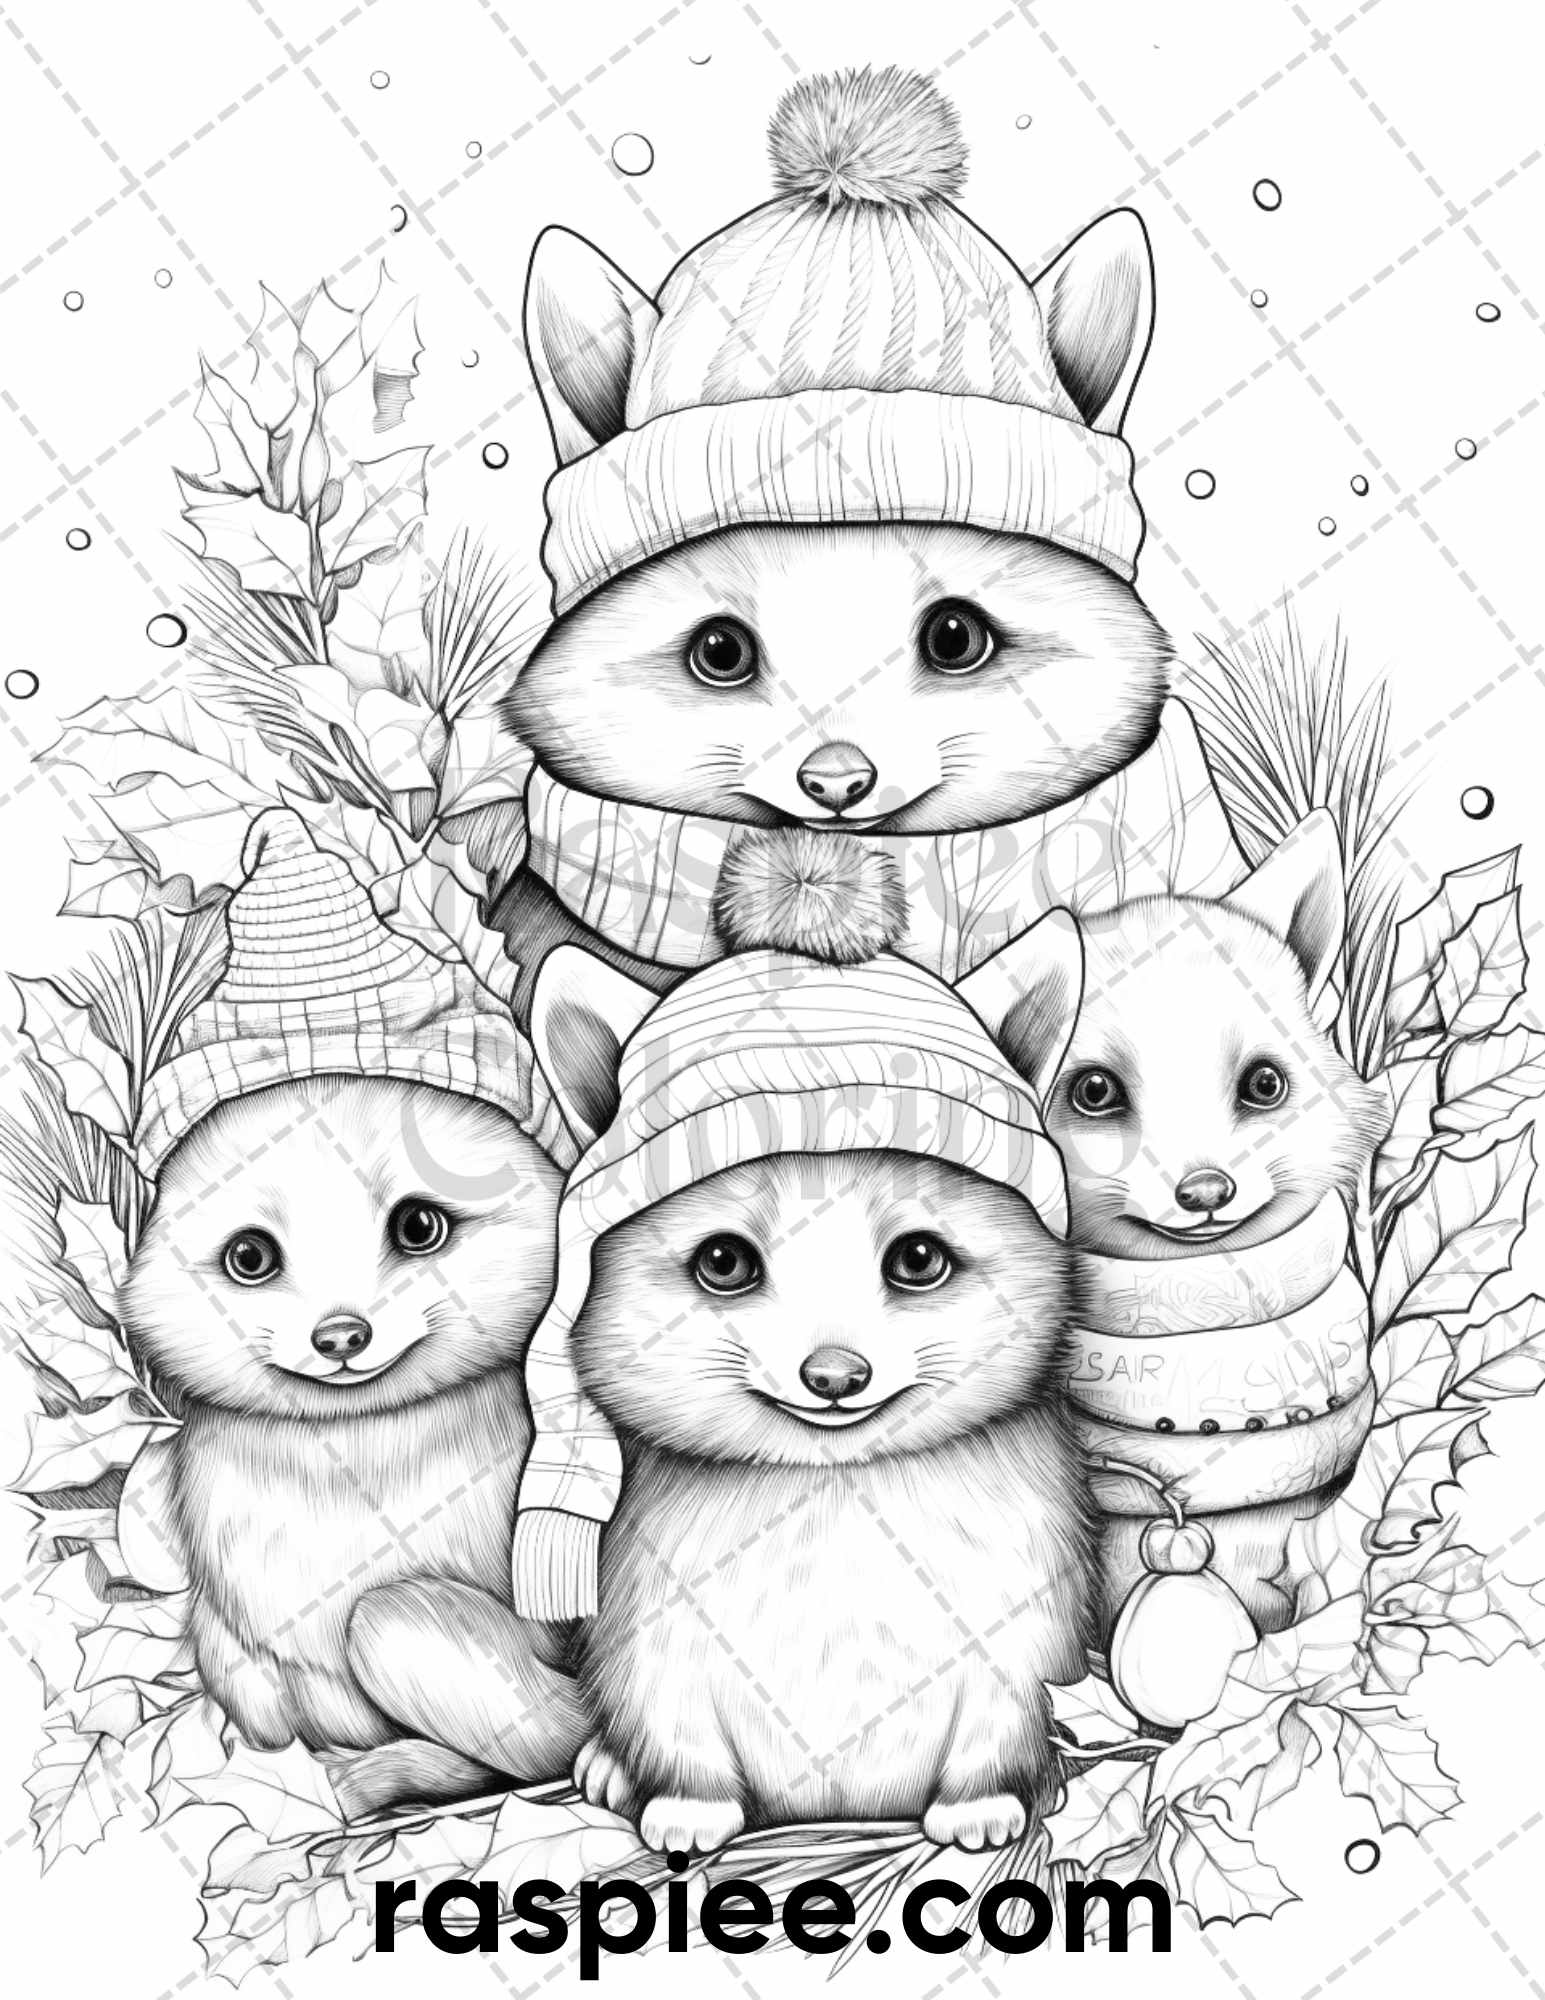 Christmas grayscale coloring page, Adult holiday coloring printable, Printable winter relaxation activity, Festive grayscale coloring sheet, Christmas coloring therapy, Seasonal coloring activities, Xmas Coloring Pages, Winter Coloring Pages, Holiday Coloring Pages, Santa Claus Coloring Pages